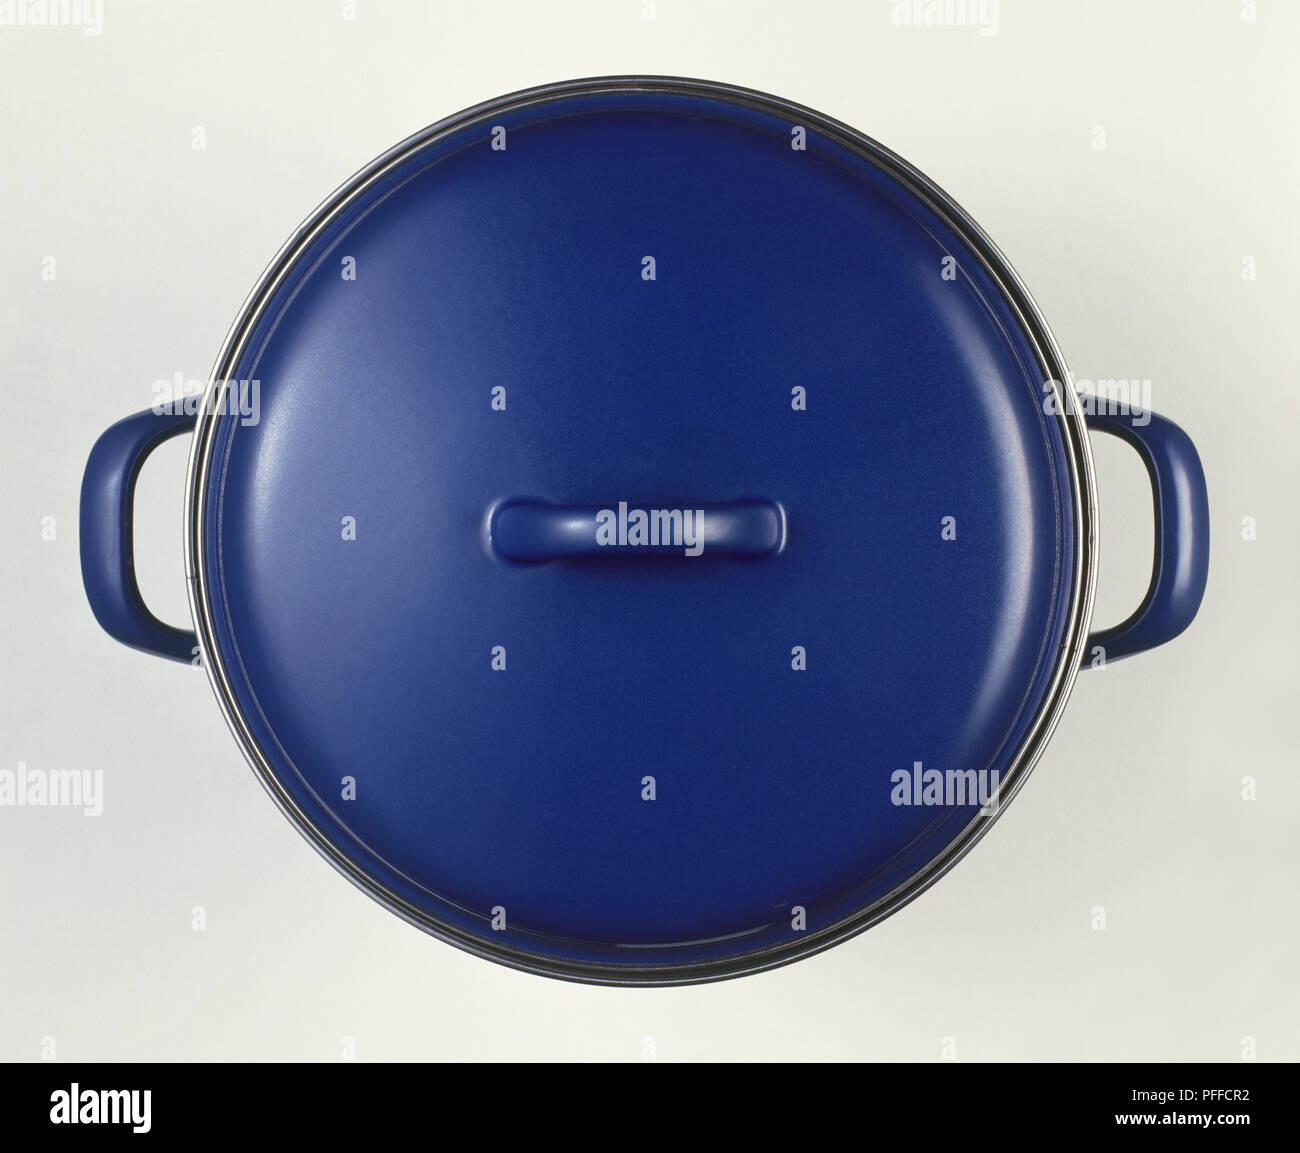 Blue saucepan with lid on Stock Photo